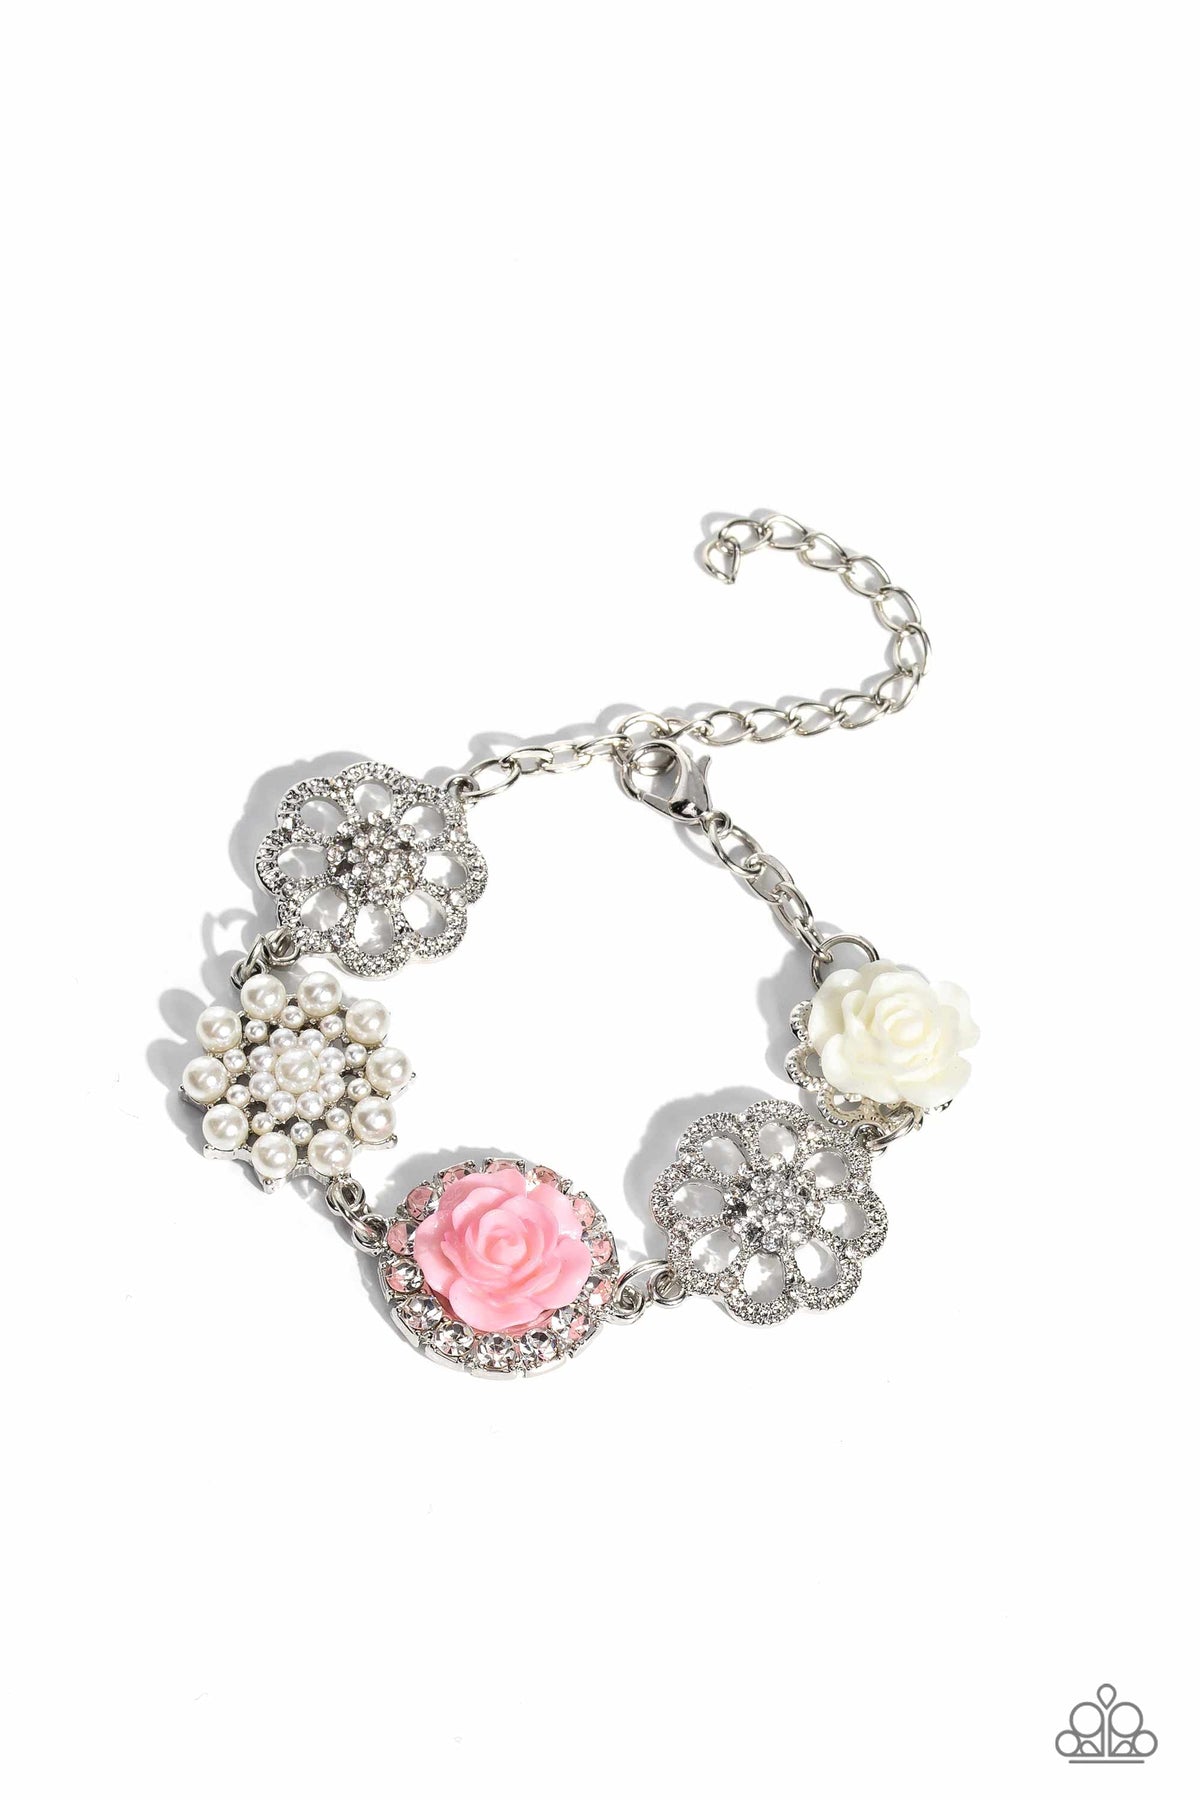 Tea Party Theme Pink Floral Bracelet - Paparazzi Accessories- lightbox - CarasShop.com - $5 Jewelry by Cara Jewels